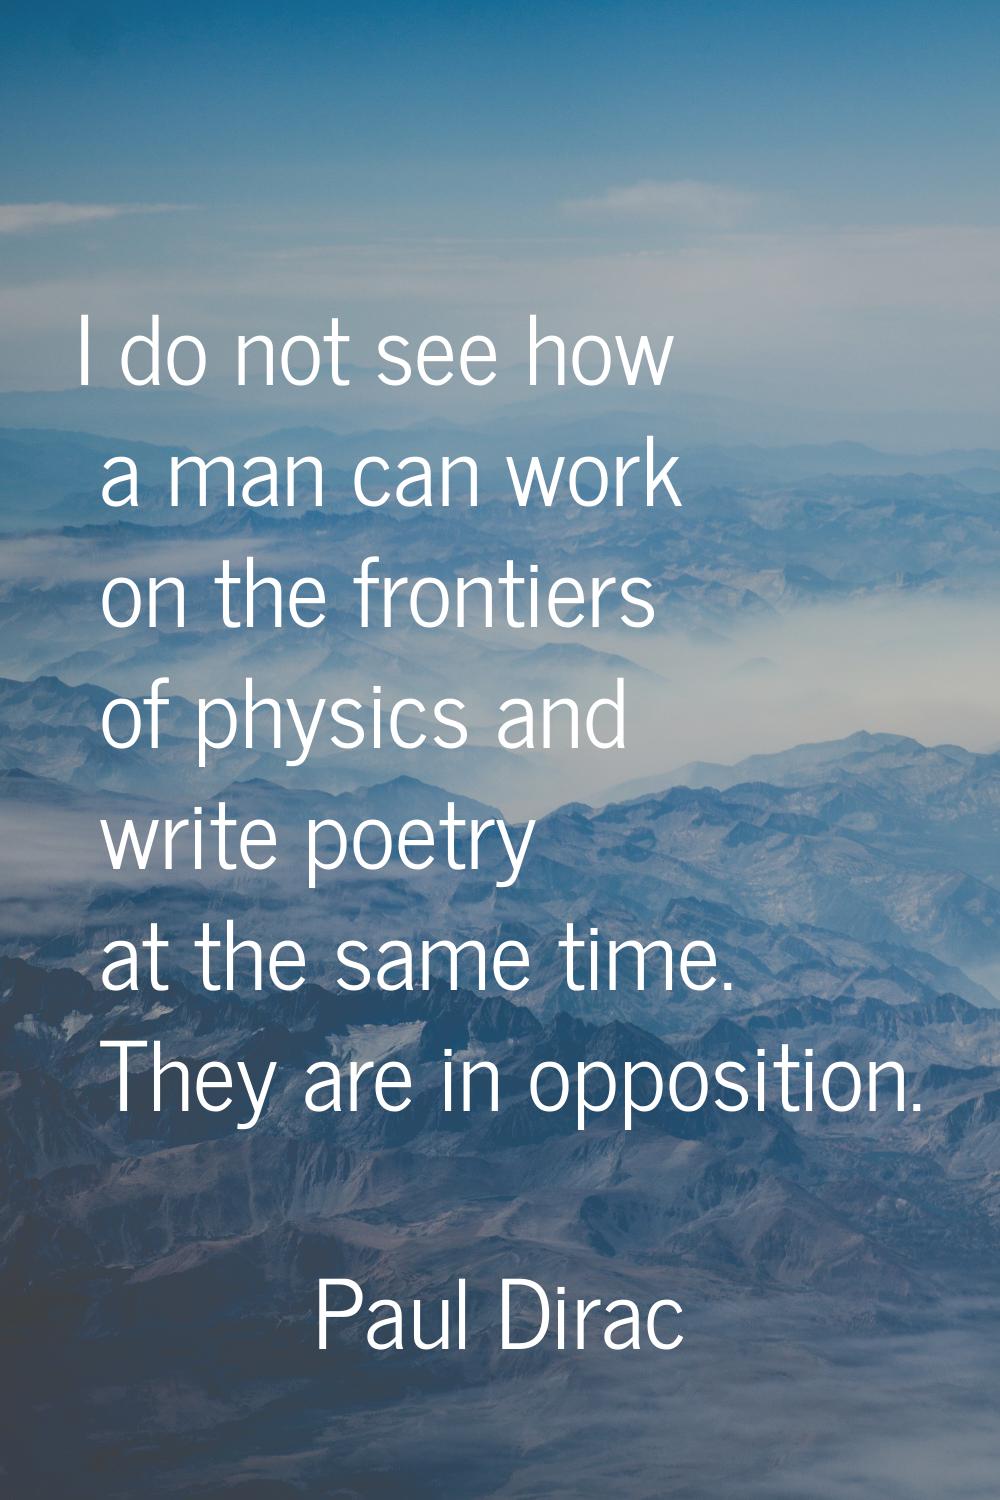 I do not see how a man can work on the frontiers of physics and write poetry at the same time. They